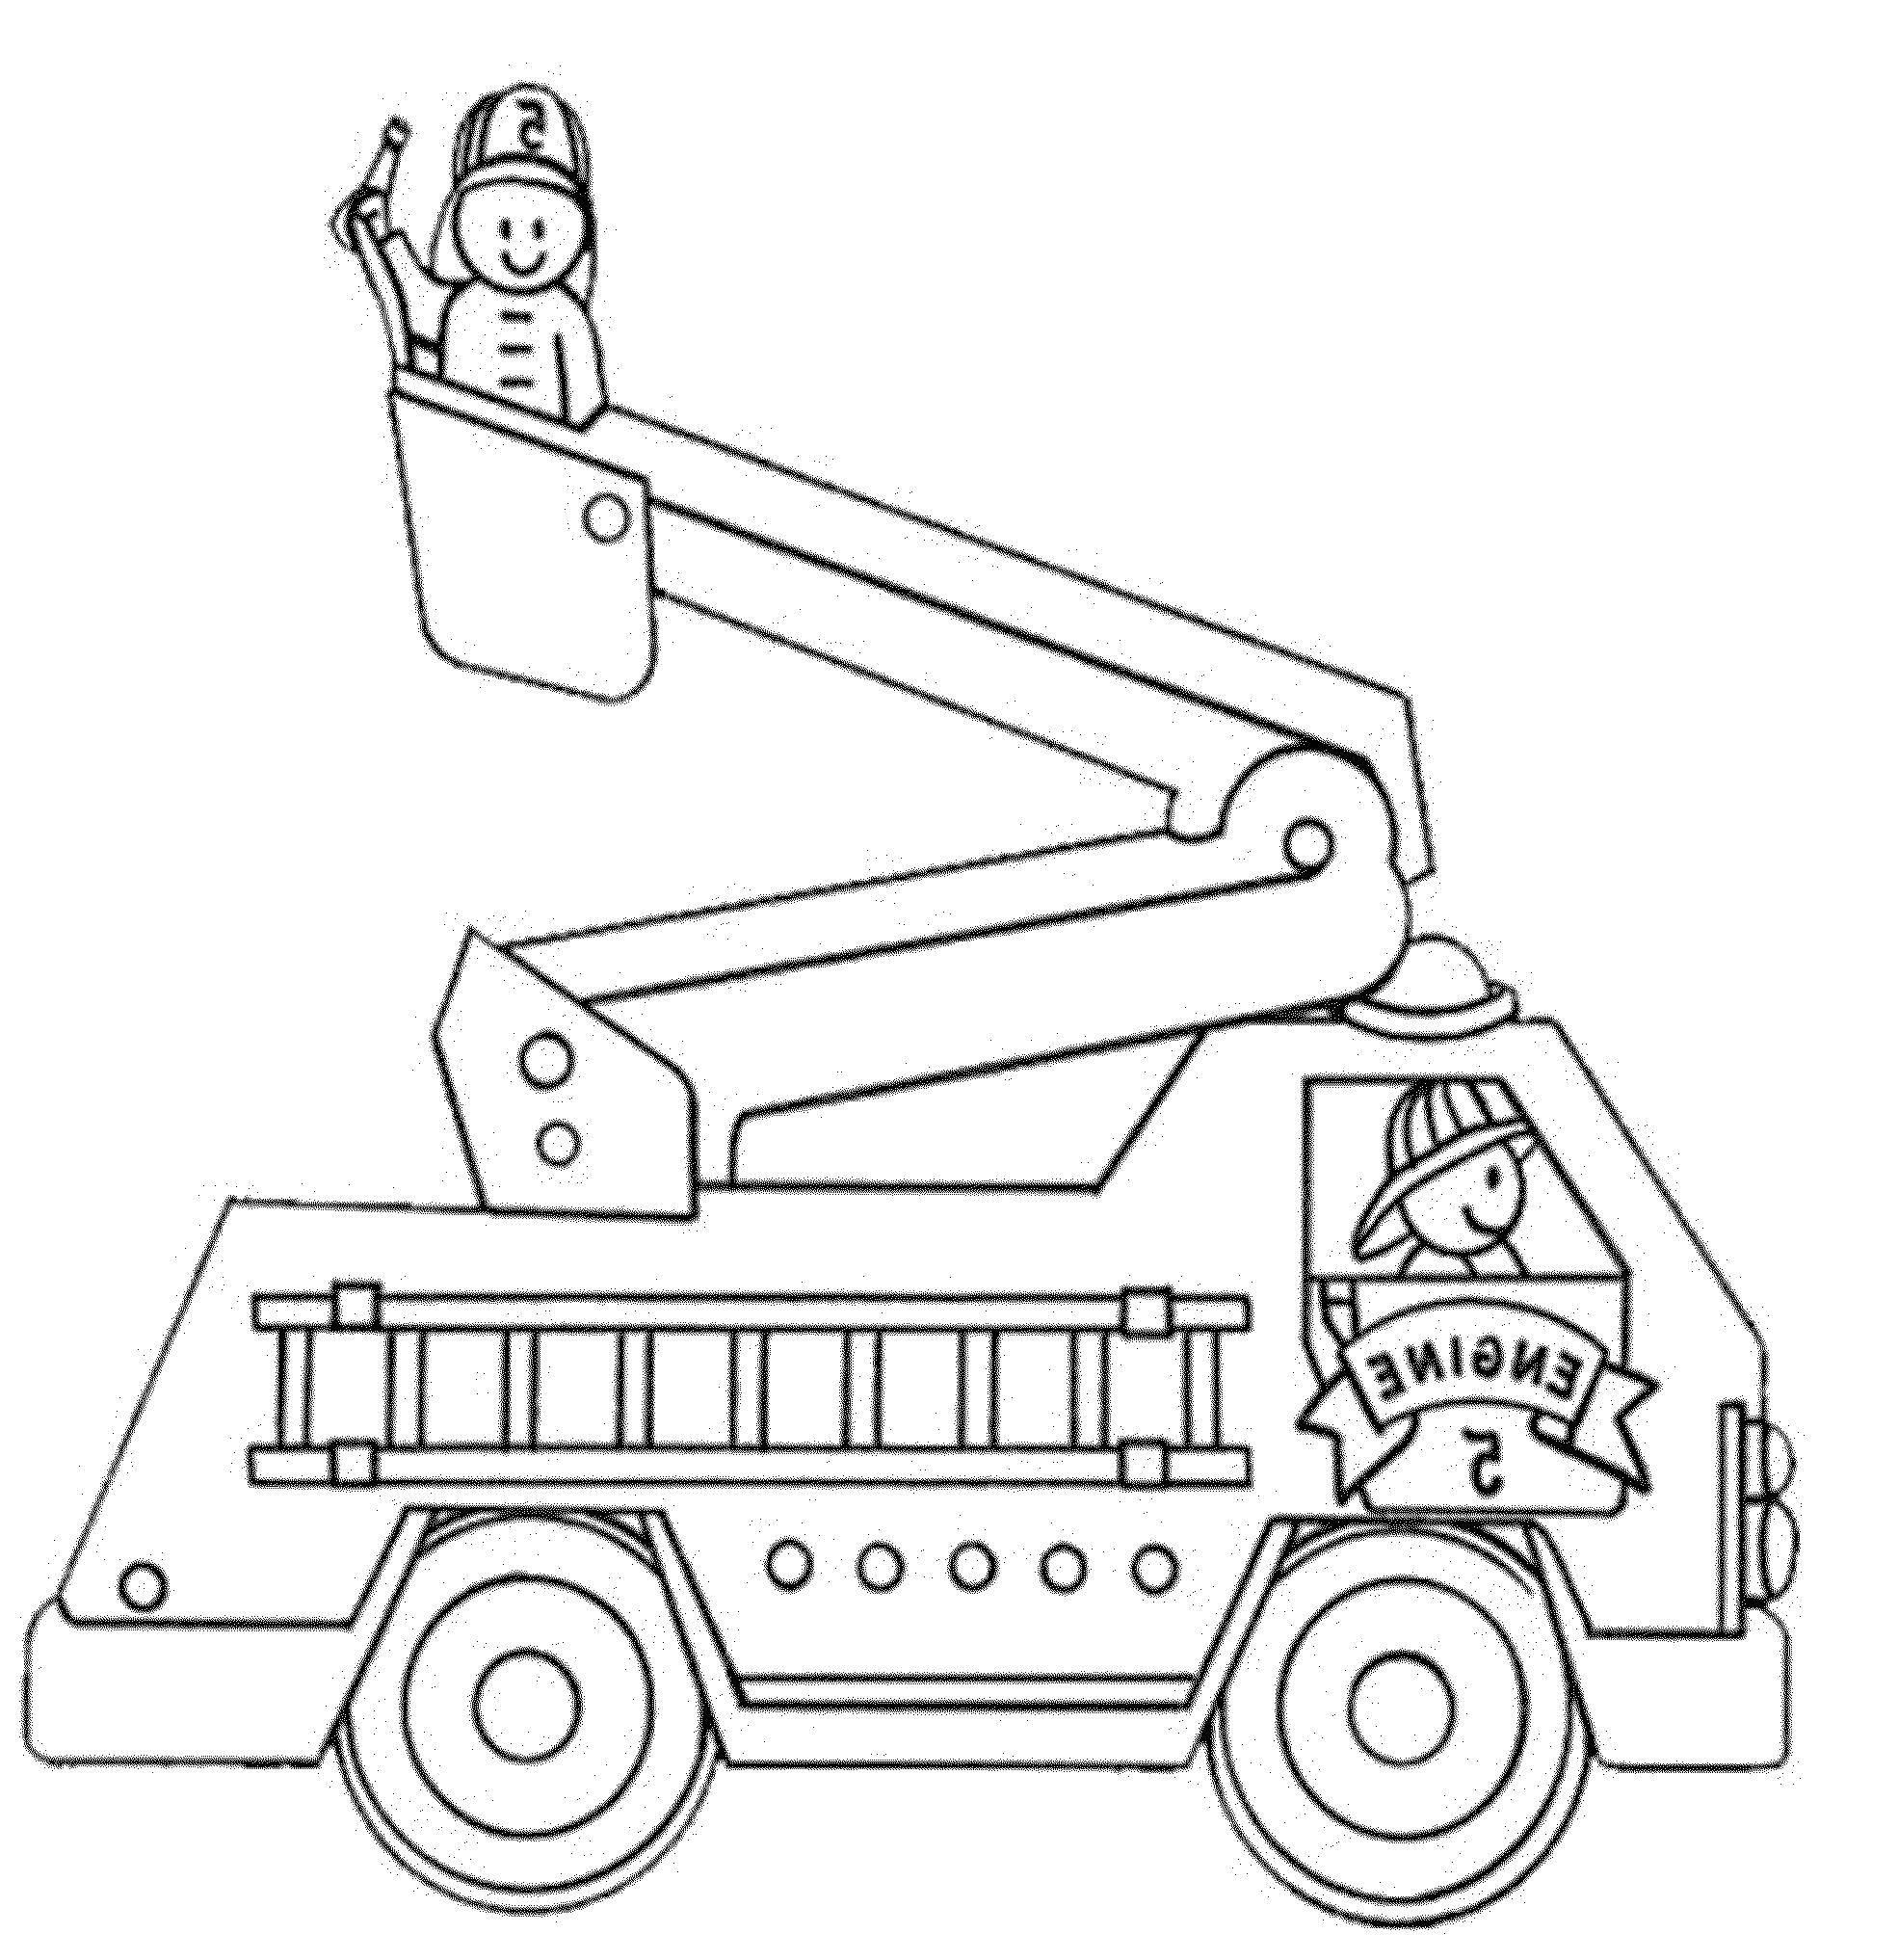 Coloring A crane and a fire. Category machine . Tags:  fire truck, ladder, fire.